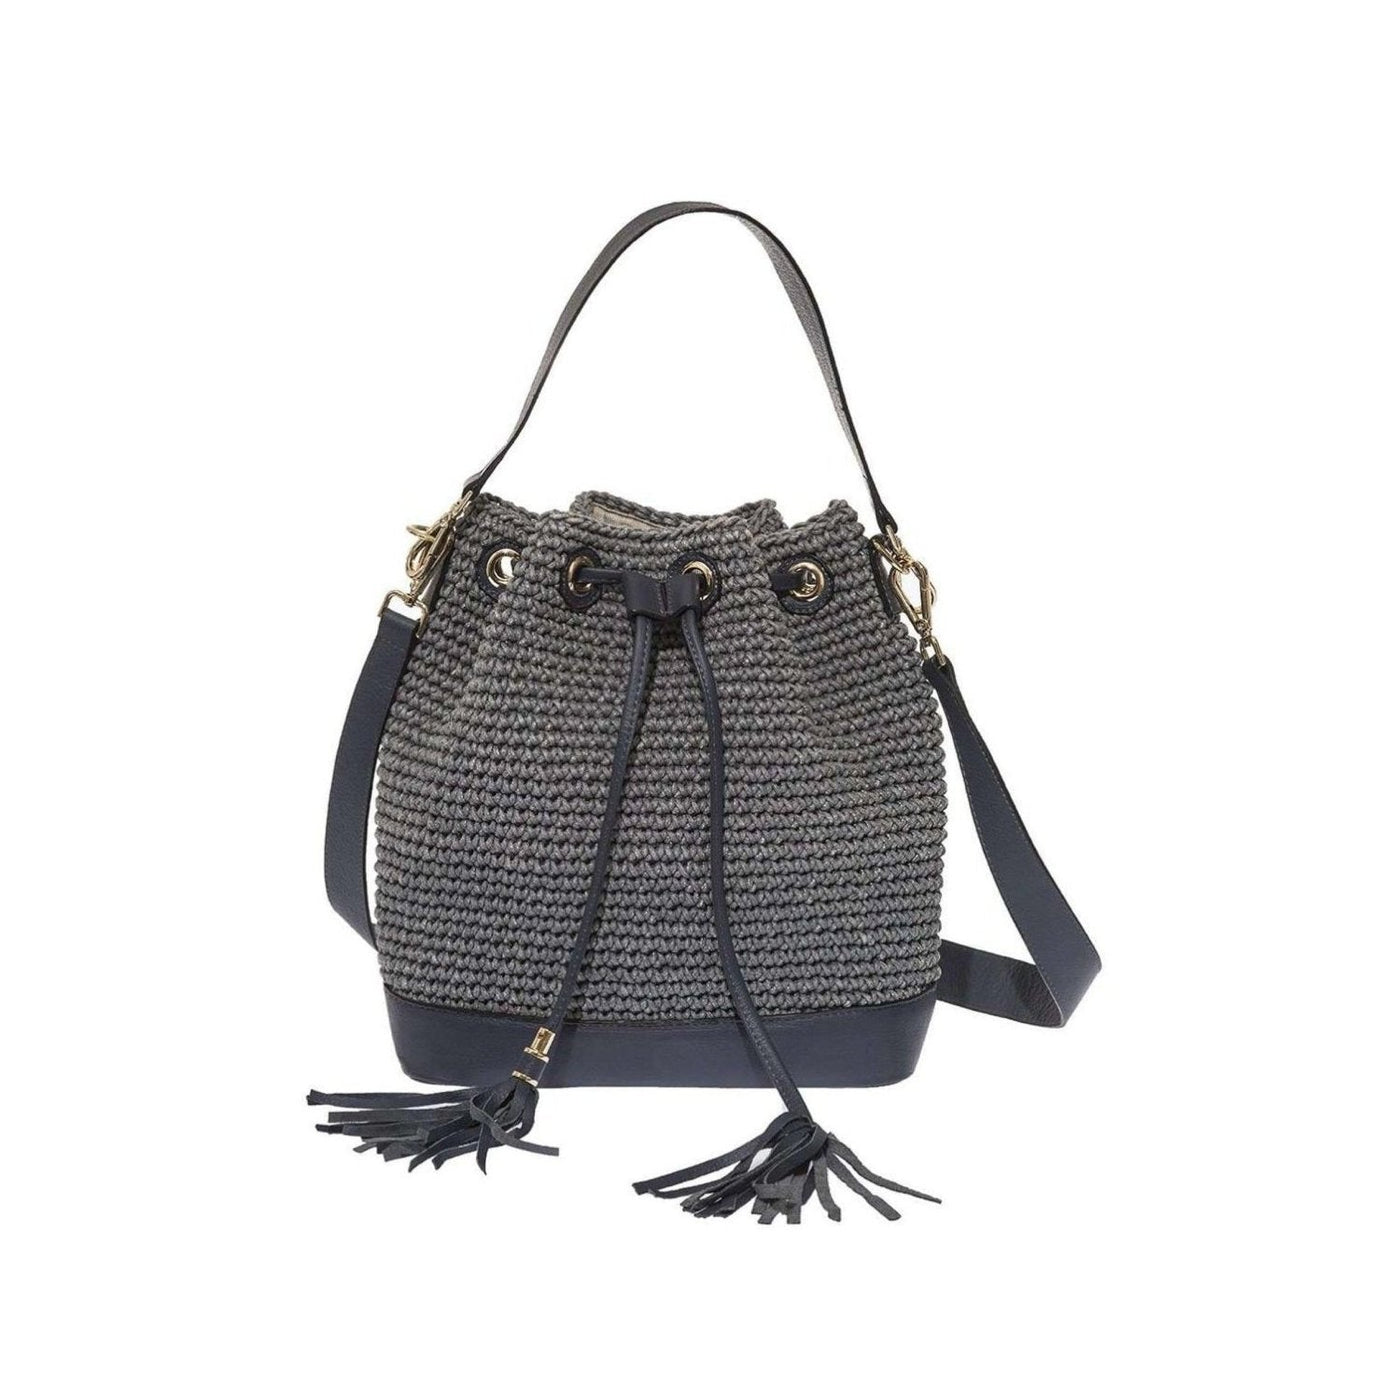 Shoulder Bag / Handbag Handmade Waxed Rope with Leather Straps - Ozzell London